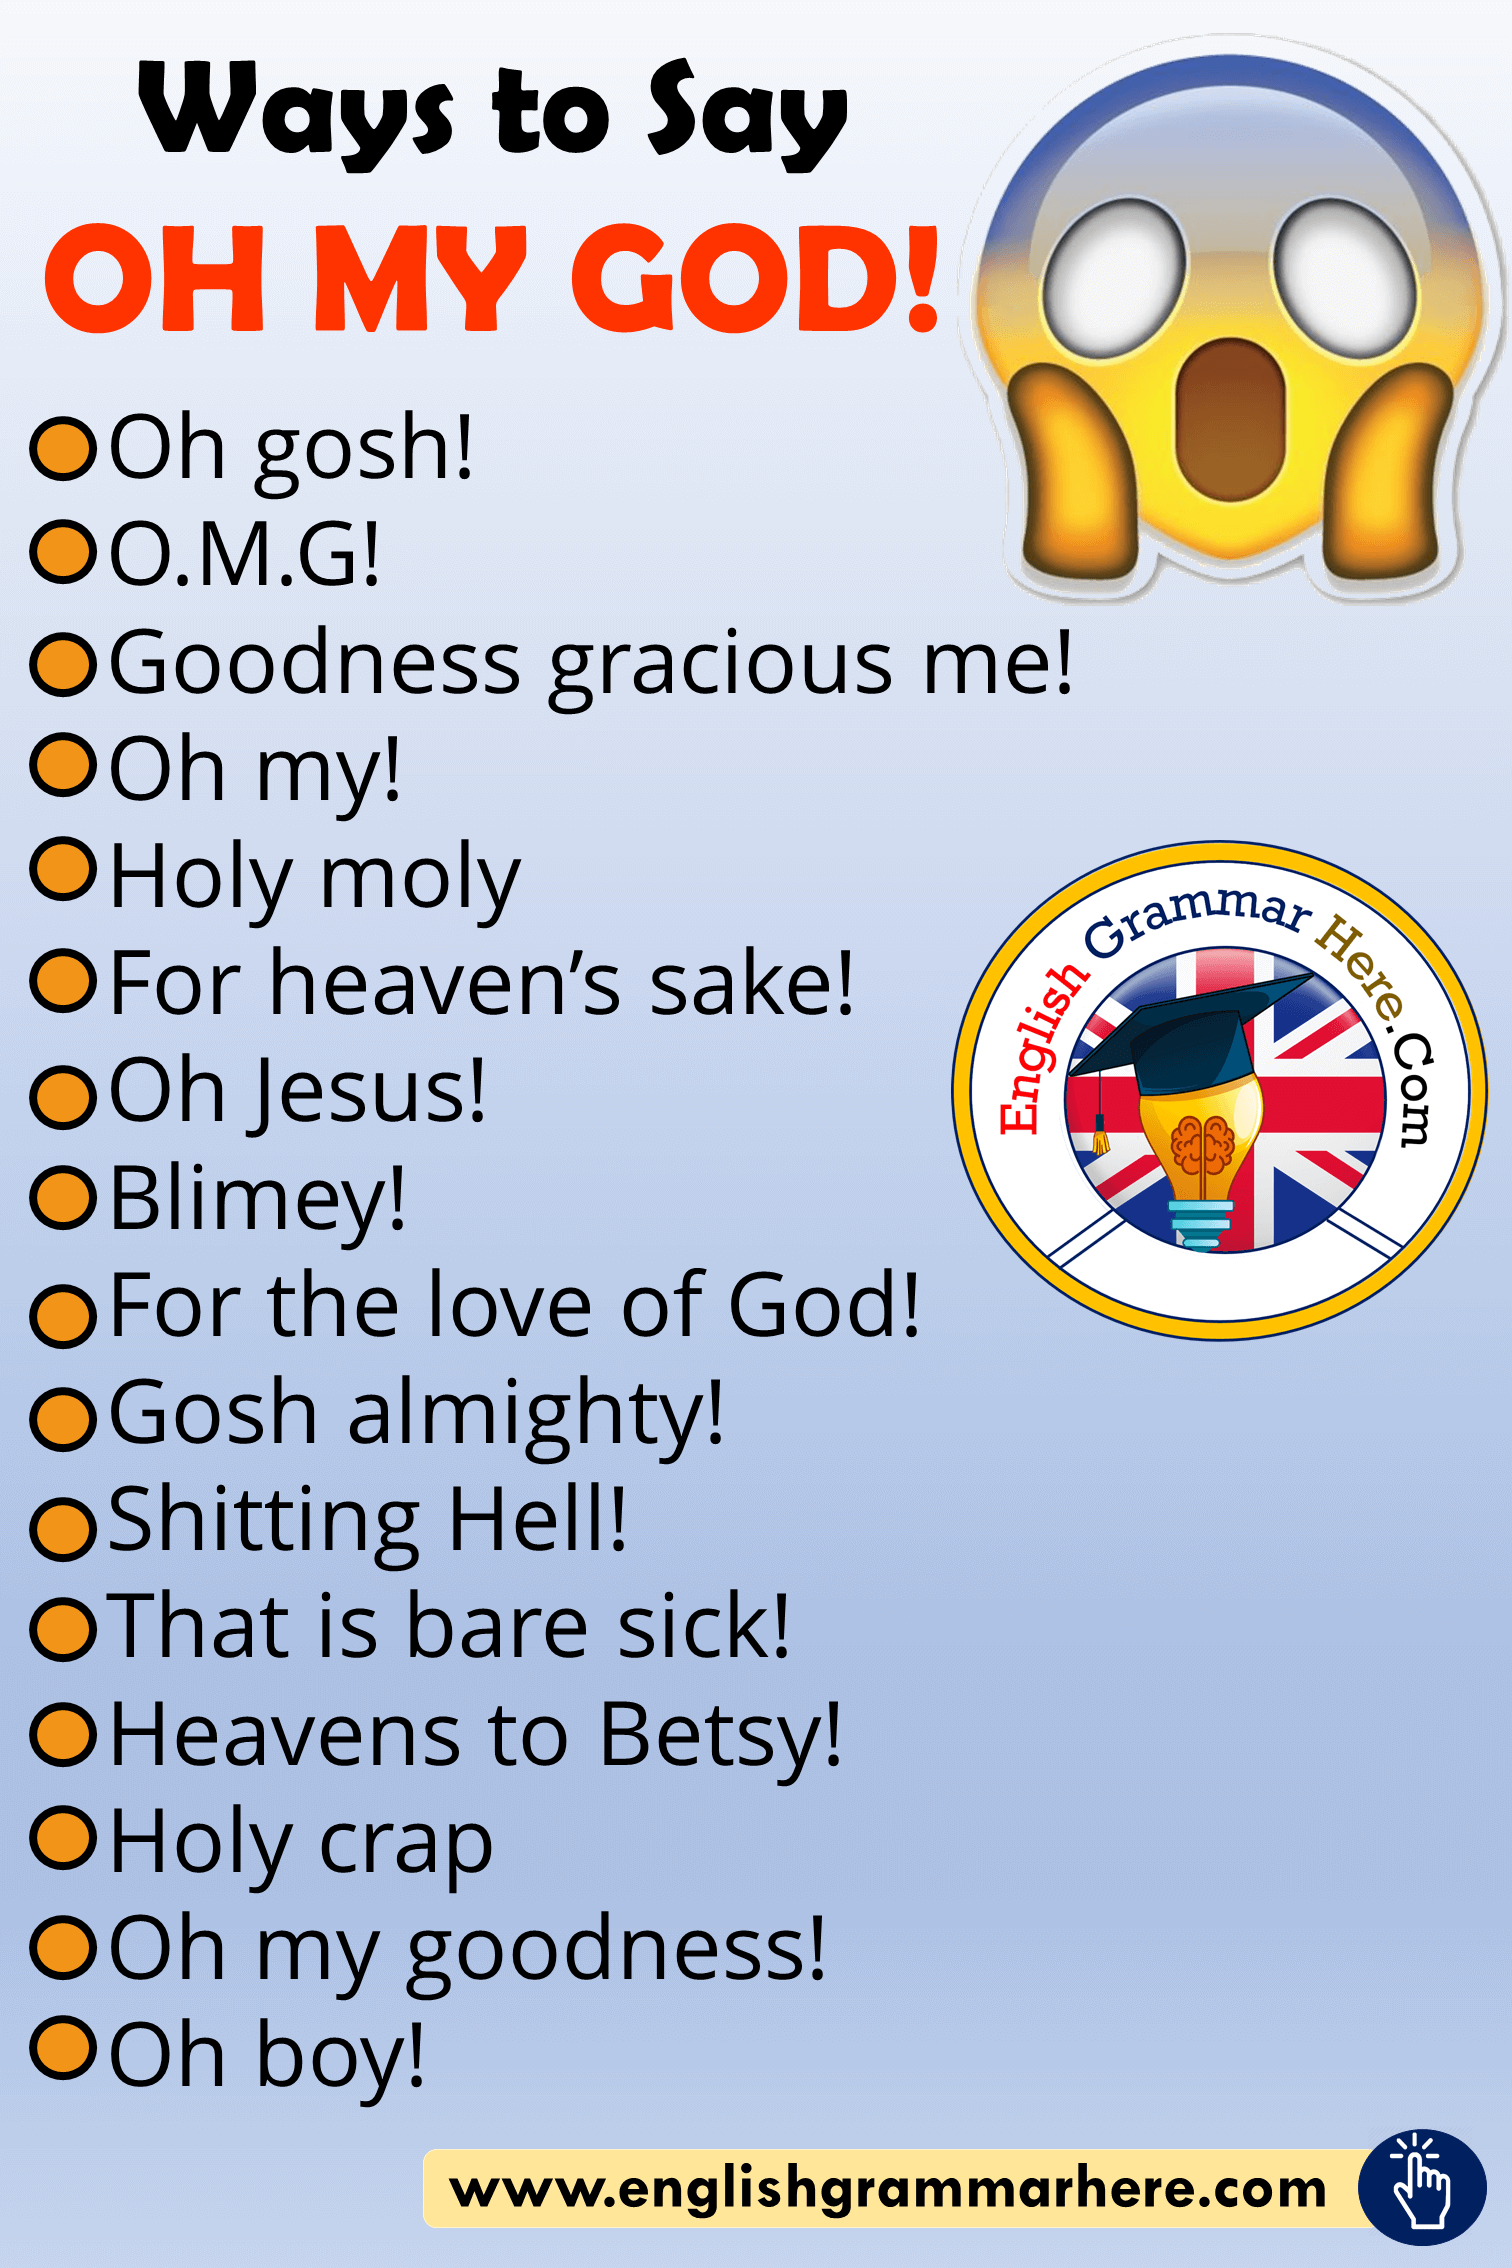 Ways to Say OH MY GOD in English